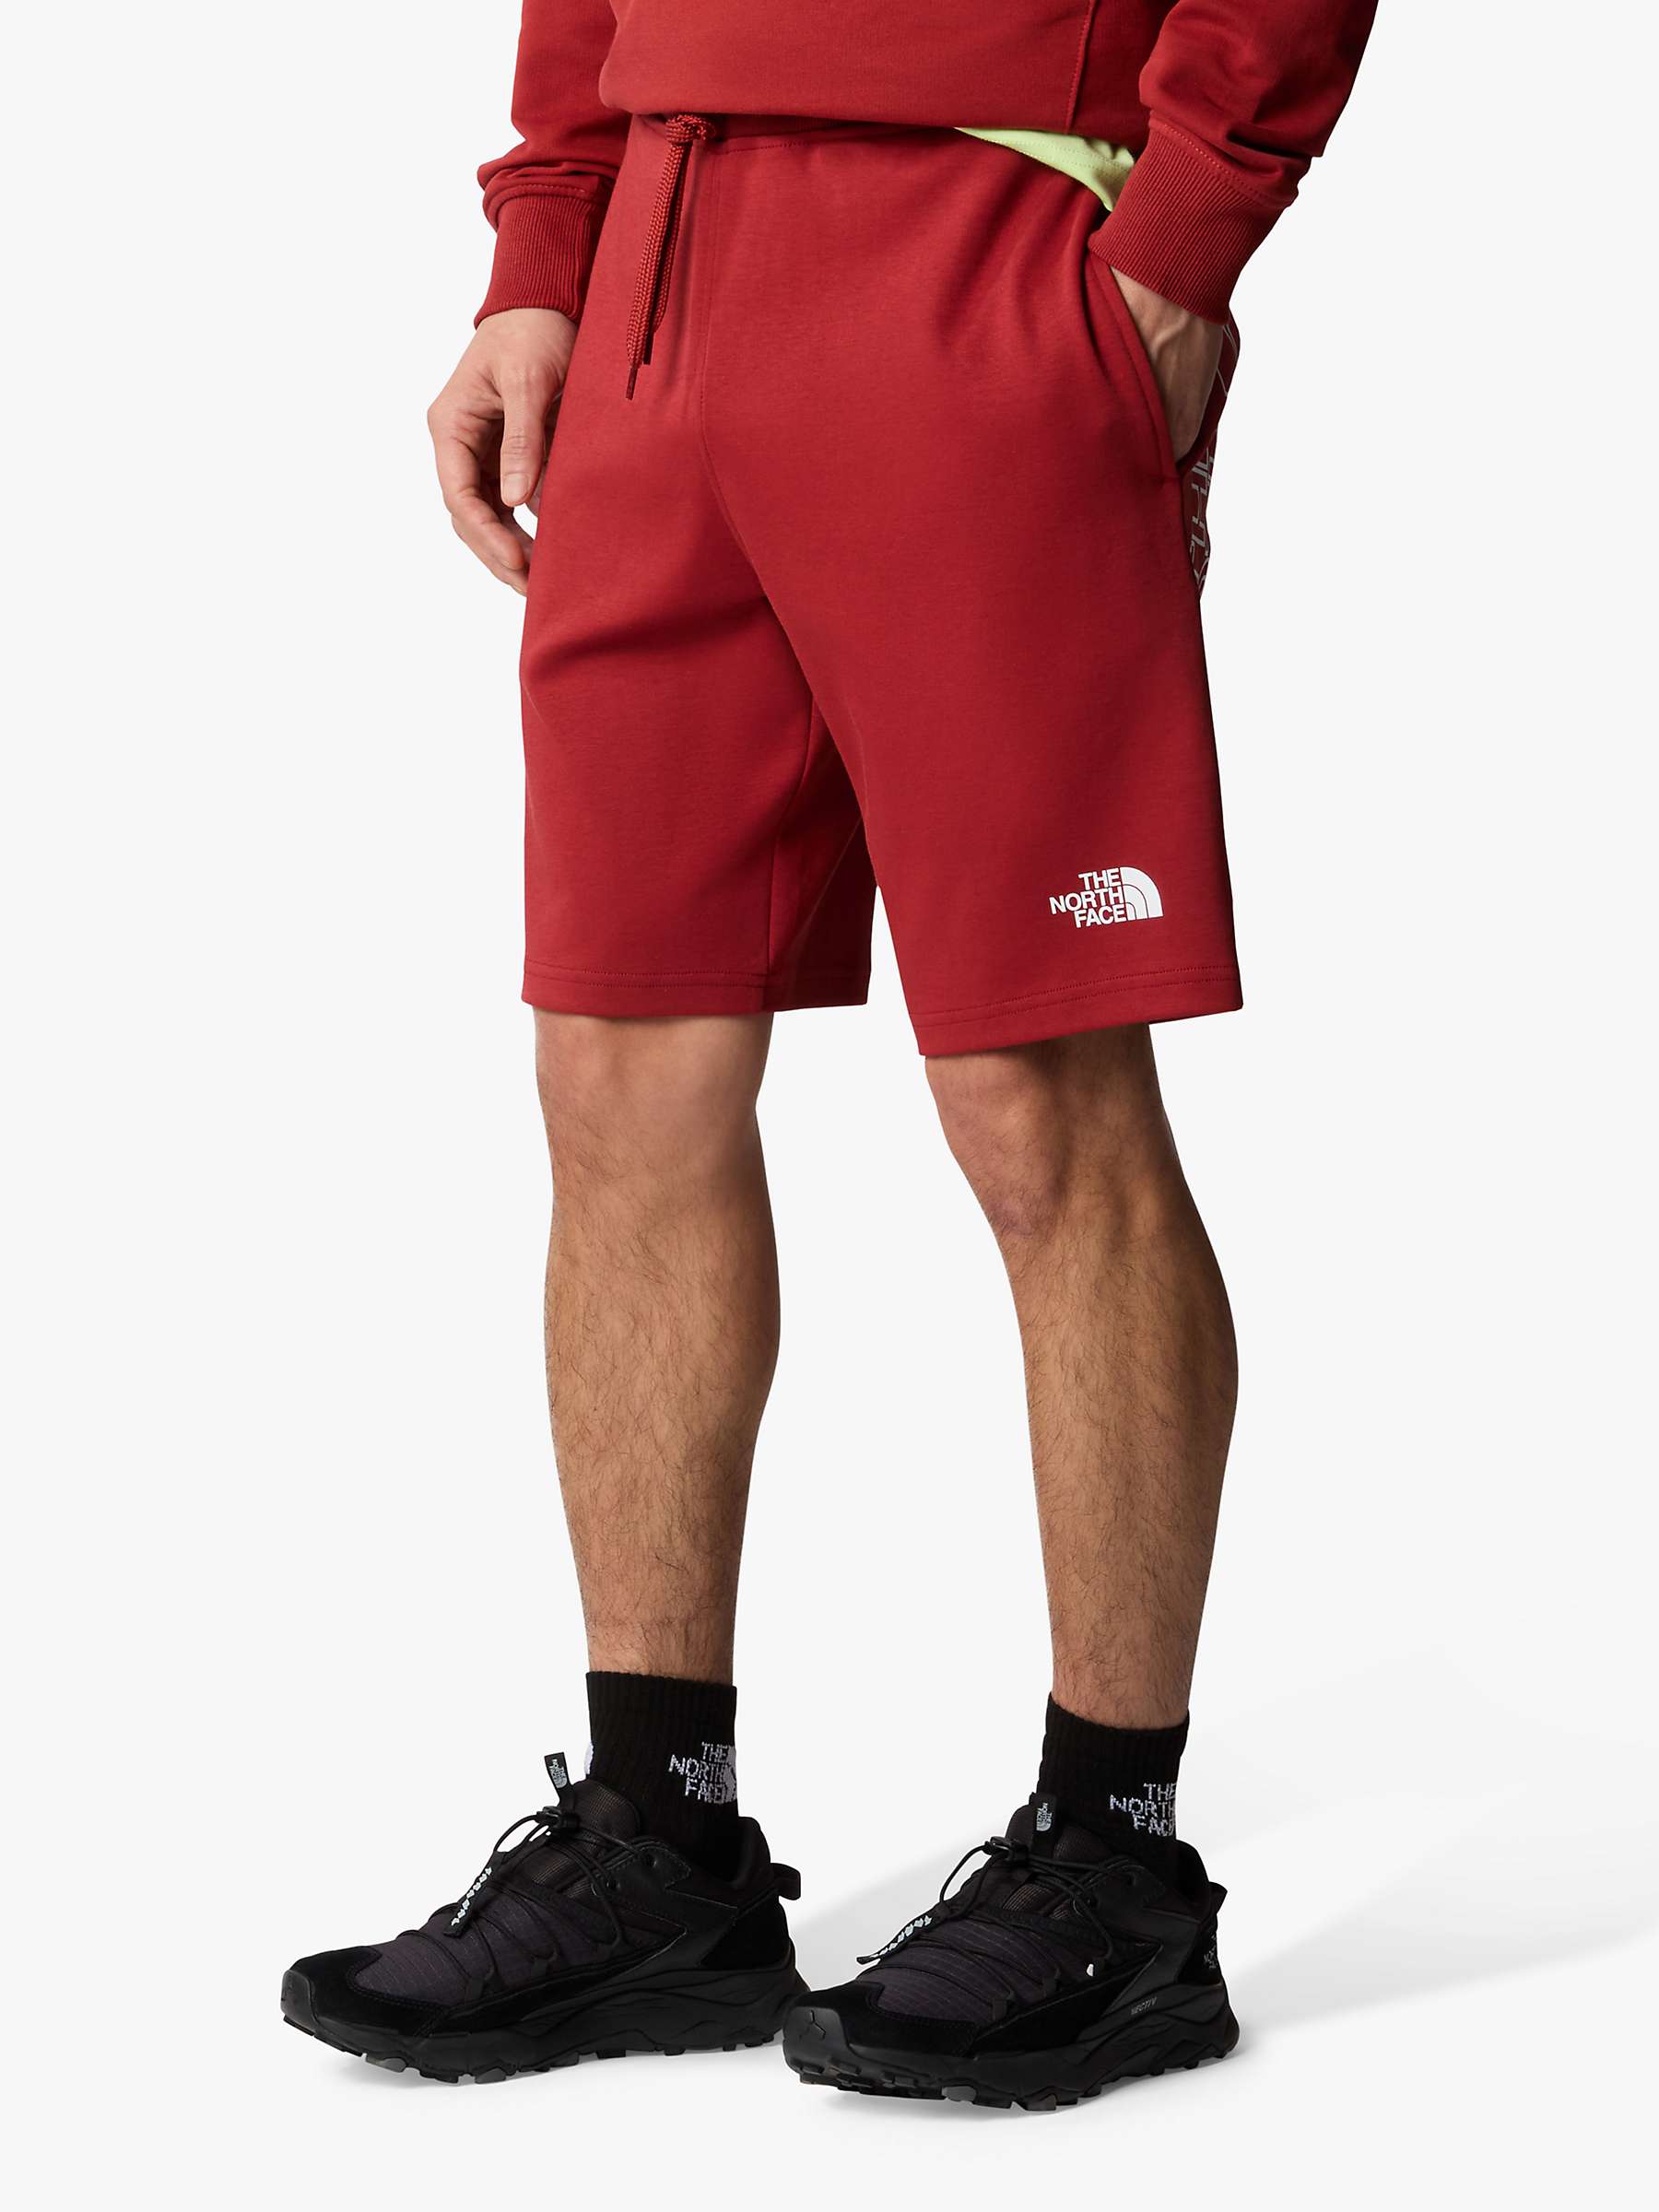 Buy The North Face Graphic Short, Red Online at johnlewis.com